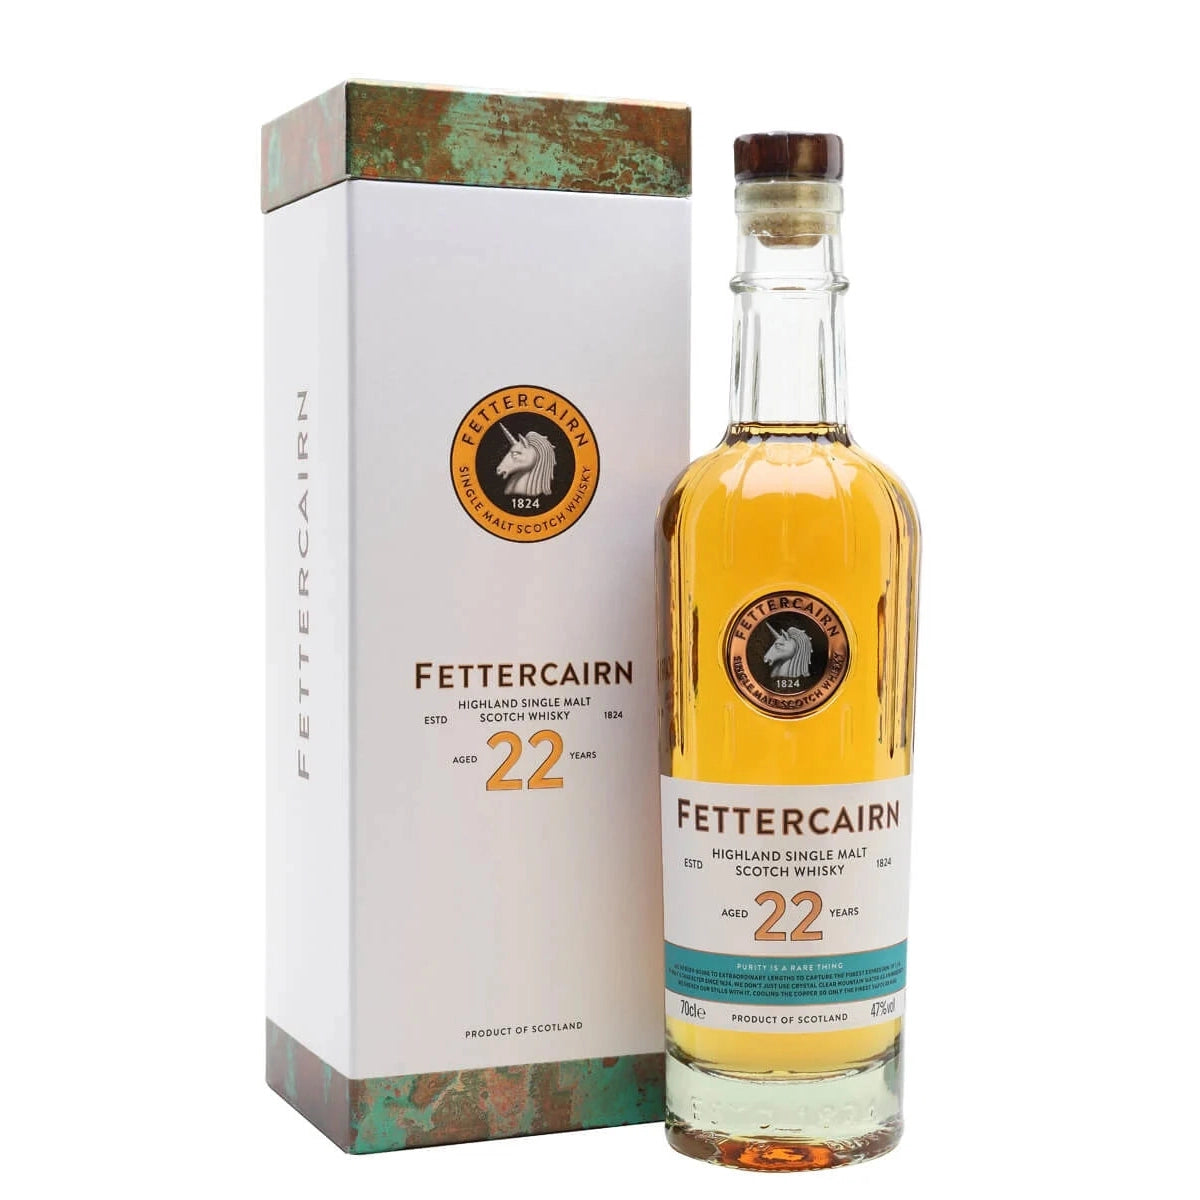 Fettercairn 22 Years Old Highland Single Malt Scotch Whisky 47% Vol. 0,7l in Giftbox